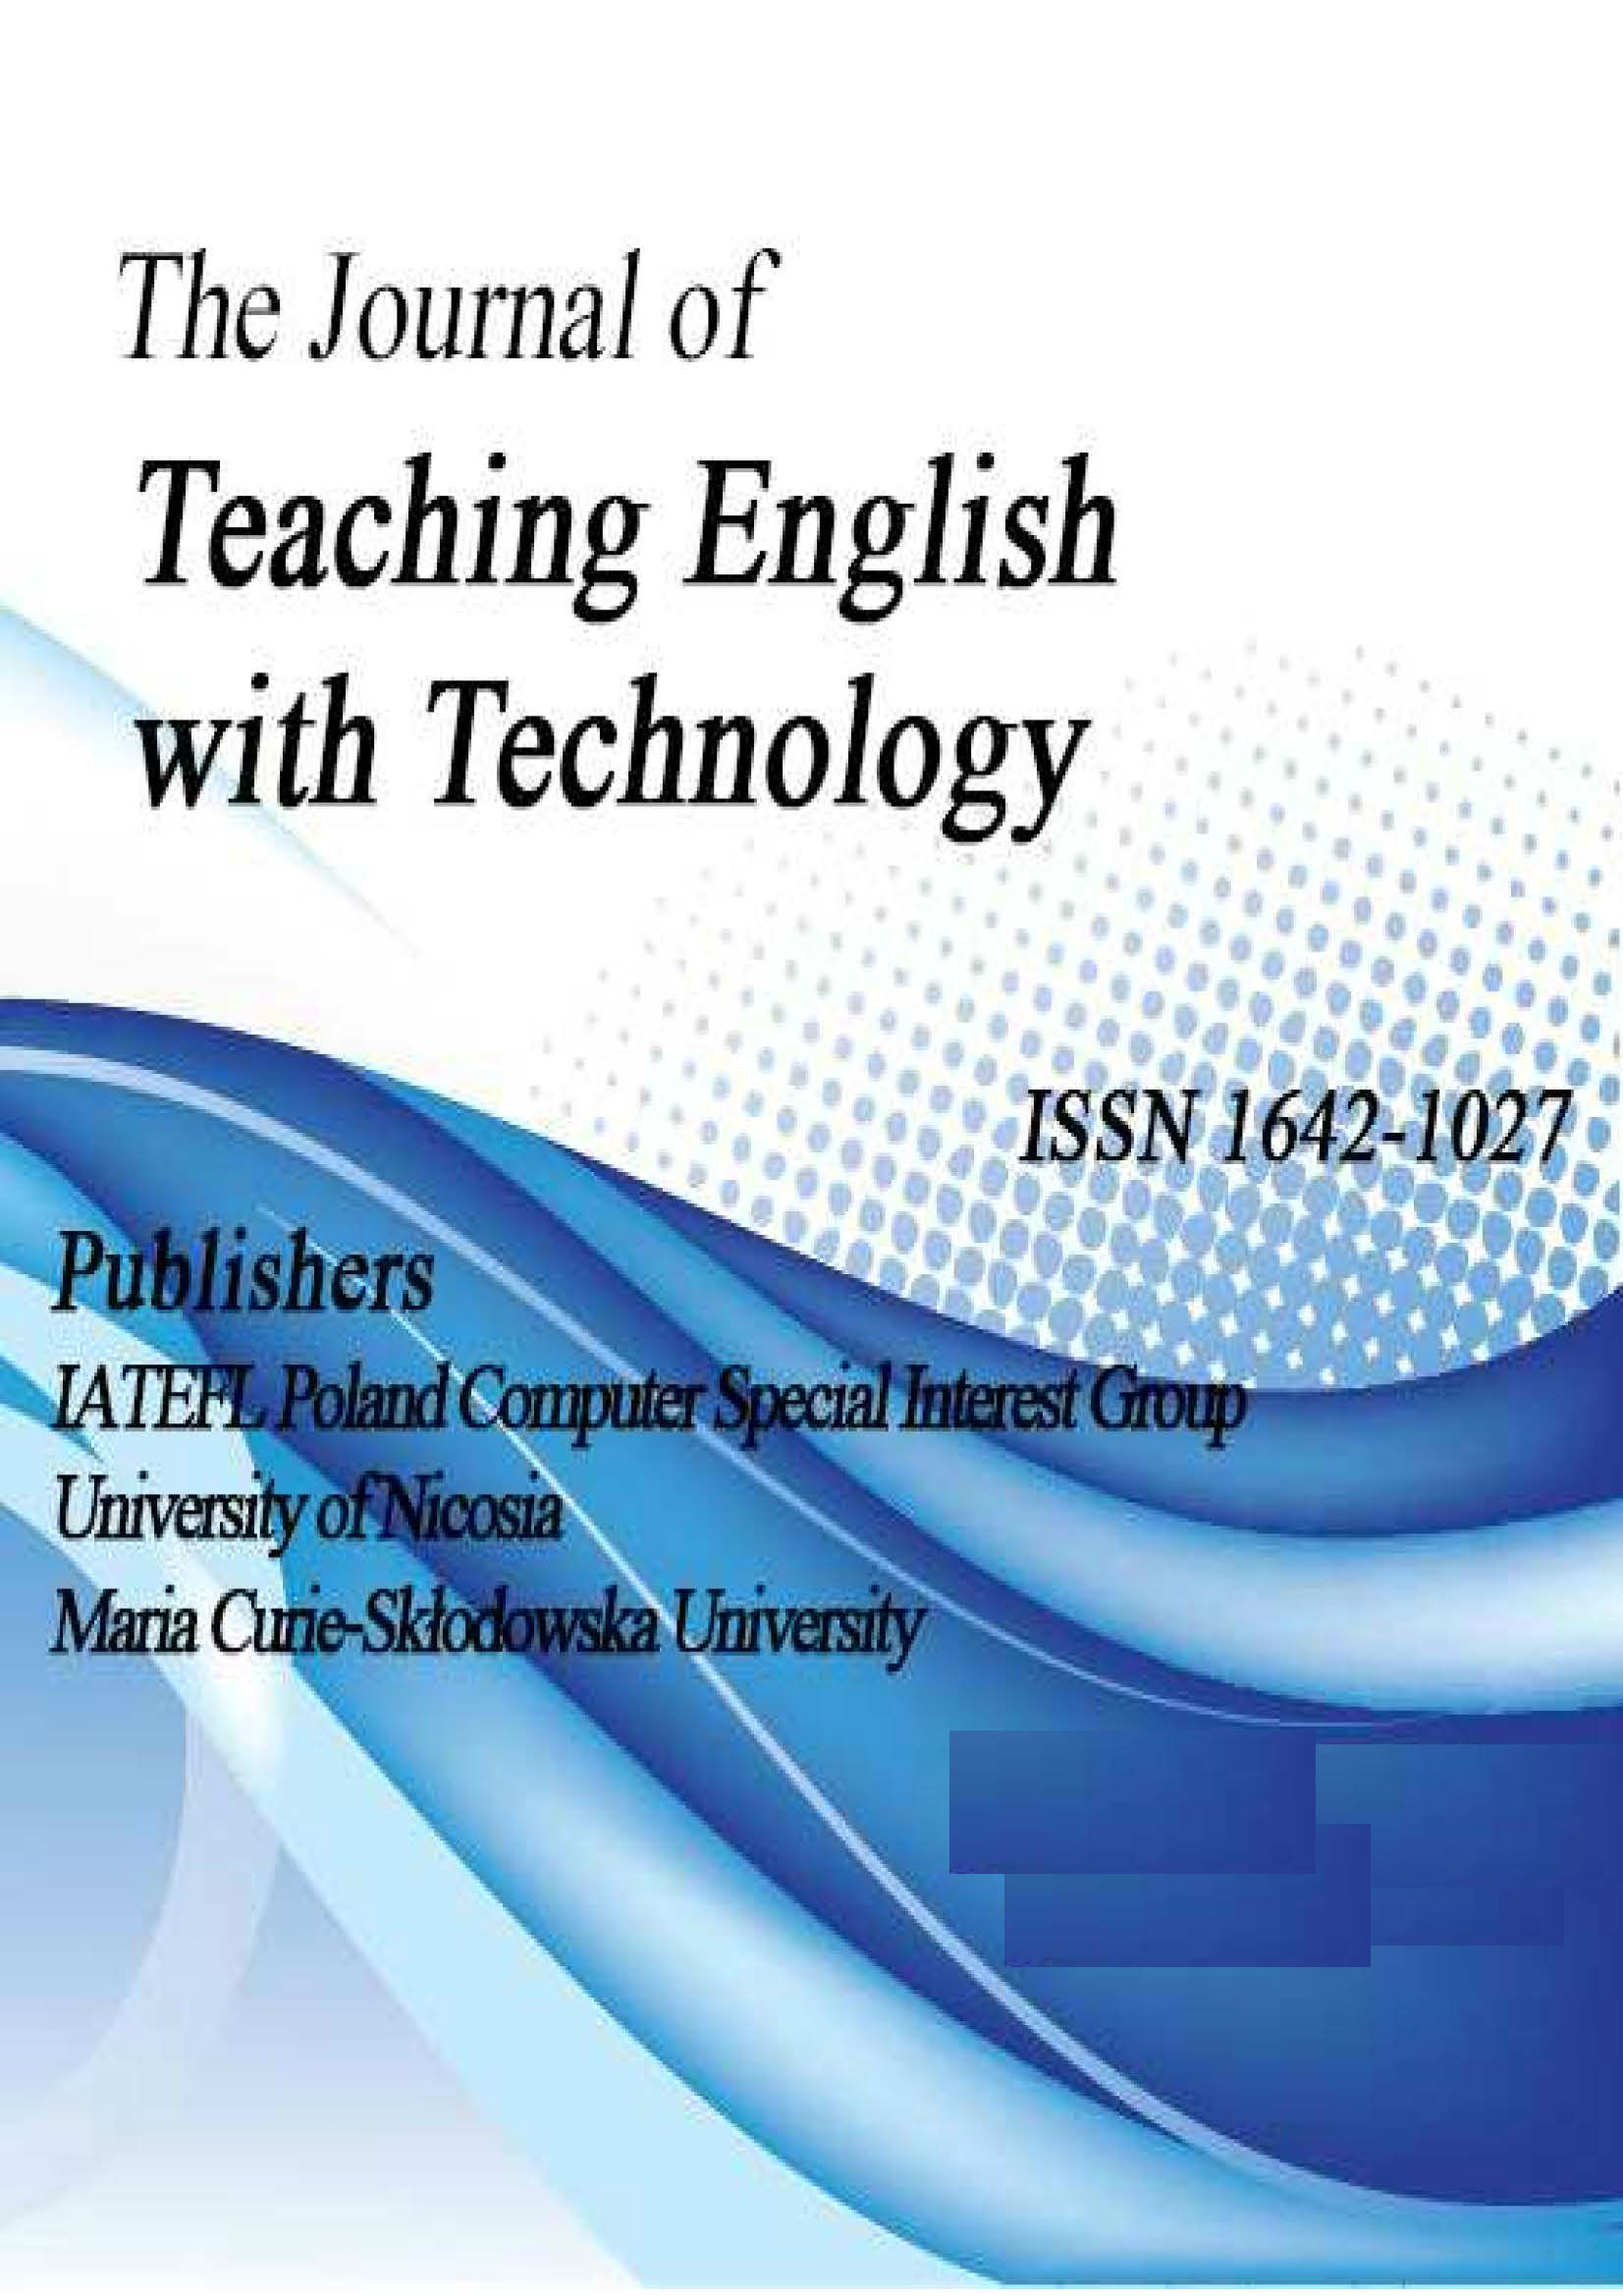 INTERMEDIATE GREEK EFL LEARNERS’ ATTITUDES 
TO ON-LINE TEACHING PRACTICES: A BLENDED TASK-BASED ENGLISH LANGUAGE LEARNING APPROACH Cover Image